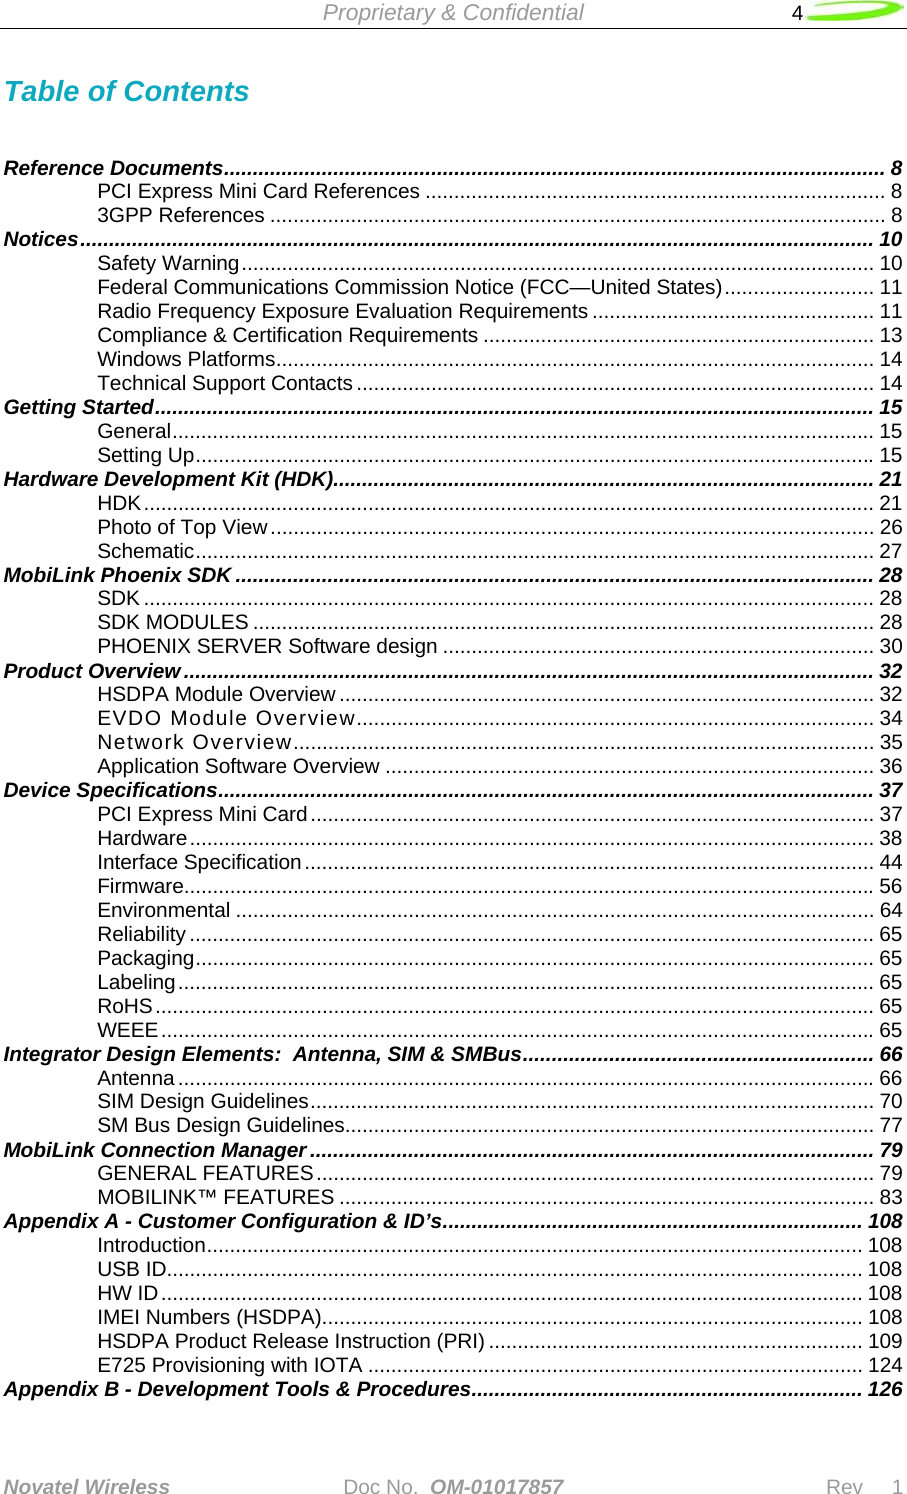  Proprietary &amp; Confidential   4  Novatel Wireless   Doc No.  OM-01017857                              Rev     1  Table of Contents   Reference Documents................................................................................................................... 8 PCI Express Mini Card References ................................................................................ 8 3GPP References ........................................................................................................... 8 Notices.......................................................................................................................................... 10 Safety Warning.............................................................................................................. 10 Federal Communications Commission Notice (FCC—United States).......................... 11 Radio Frequency Exposure Evaluation Requirements ................................................. 11 Compliance &amp; Certification Requirements .................................................................... 13 Windows Platforms........................................................................................................ 14 Technical Support Contacts .......................................................................................... 14 Getting Started............................................................................................................................. 15 General.......................................................................................................................... 15 Setting Up......................................................................................................................15 Hardware Development Kit (HDK).............................................................................................. 21 HDK............................................................................................................................... 21 Photo of Top View......................................................................................................... 26 Schematic...................................................................................................................... 27 MobiLink Phoenix SDK ............................................................................................................... 28 SDK ............................................................................................................................... 28 SDK MODULES ............................................................................................................ 28 PHOENIX SERVER Software design ........................................................................... 30 Product Overview........................................................................................................................ 32 HSDPA Module Overview ............................................................................................. 32 EVDO Module Overview.......................................................................................... 34 Network Overview..................................................................................................... 35 Application Software Overview ..................................................................................... 36 Device Specifications.................................................................................................................. 37 PCI Express Mini Card.................................................................................................. 37 Hardware....................................................................................................................... 38 Interface Specification................................................................................................... 44 Firmware........................................................................................................................56 Environmental ............................................................................................................... 64 Reliability ....................................................................................................................... 65 Packaging...................................................................................................................... 65 Labeling......................................................................................................................... 65 RoHS............................................................................................................................. 65 WEEE............................................................................................................................65 Integrator Design Elements:  Antenna, SIM &amp; SMBus............................................................. 66 Antenna .........................................................................................................................66 SIM Design Guidelines.................................................................................................. 70 SM Bus Design Guidelines............................................................................................ 77 MobiLink Connection Manager .................................................................................................. 79 GENERAL FEATURES................................................................................................. 79 MOBILINK™ FEATURES ............................................................................................. 83 Appendix A - Customer Configuration &amp; ID’s......................................................................... 108 Introduction.................................................................................................................. 108 USB ID......................................................................................................................... 108 HW ID.......................................................................................................................... 108 IMEI Numbers (HSDPA).............................................................................................. 108 HSDPA Product Release Instruction (PRI) ................................................................. 109 E725 Provisioning with IOTA ...................................................................................... 124 Appendix B - Development Tools &amp; Procedures.................................................................... 126 